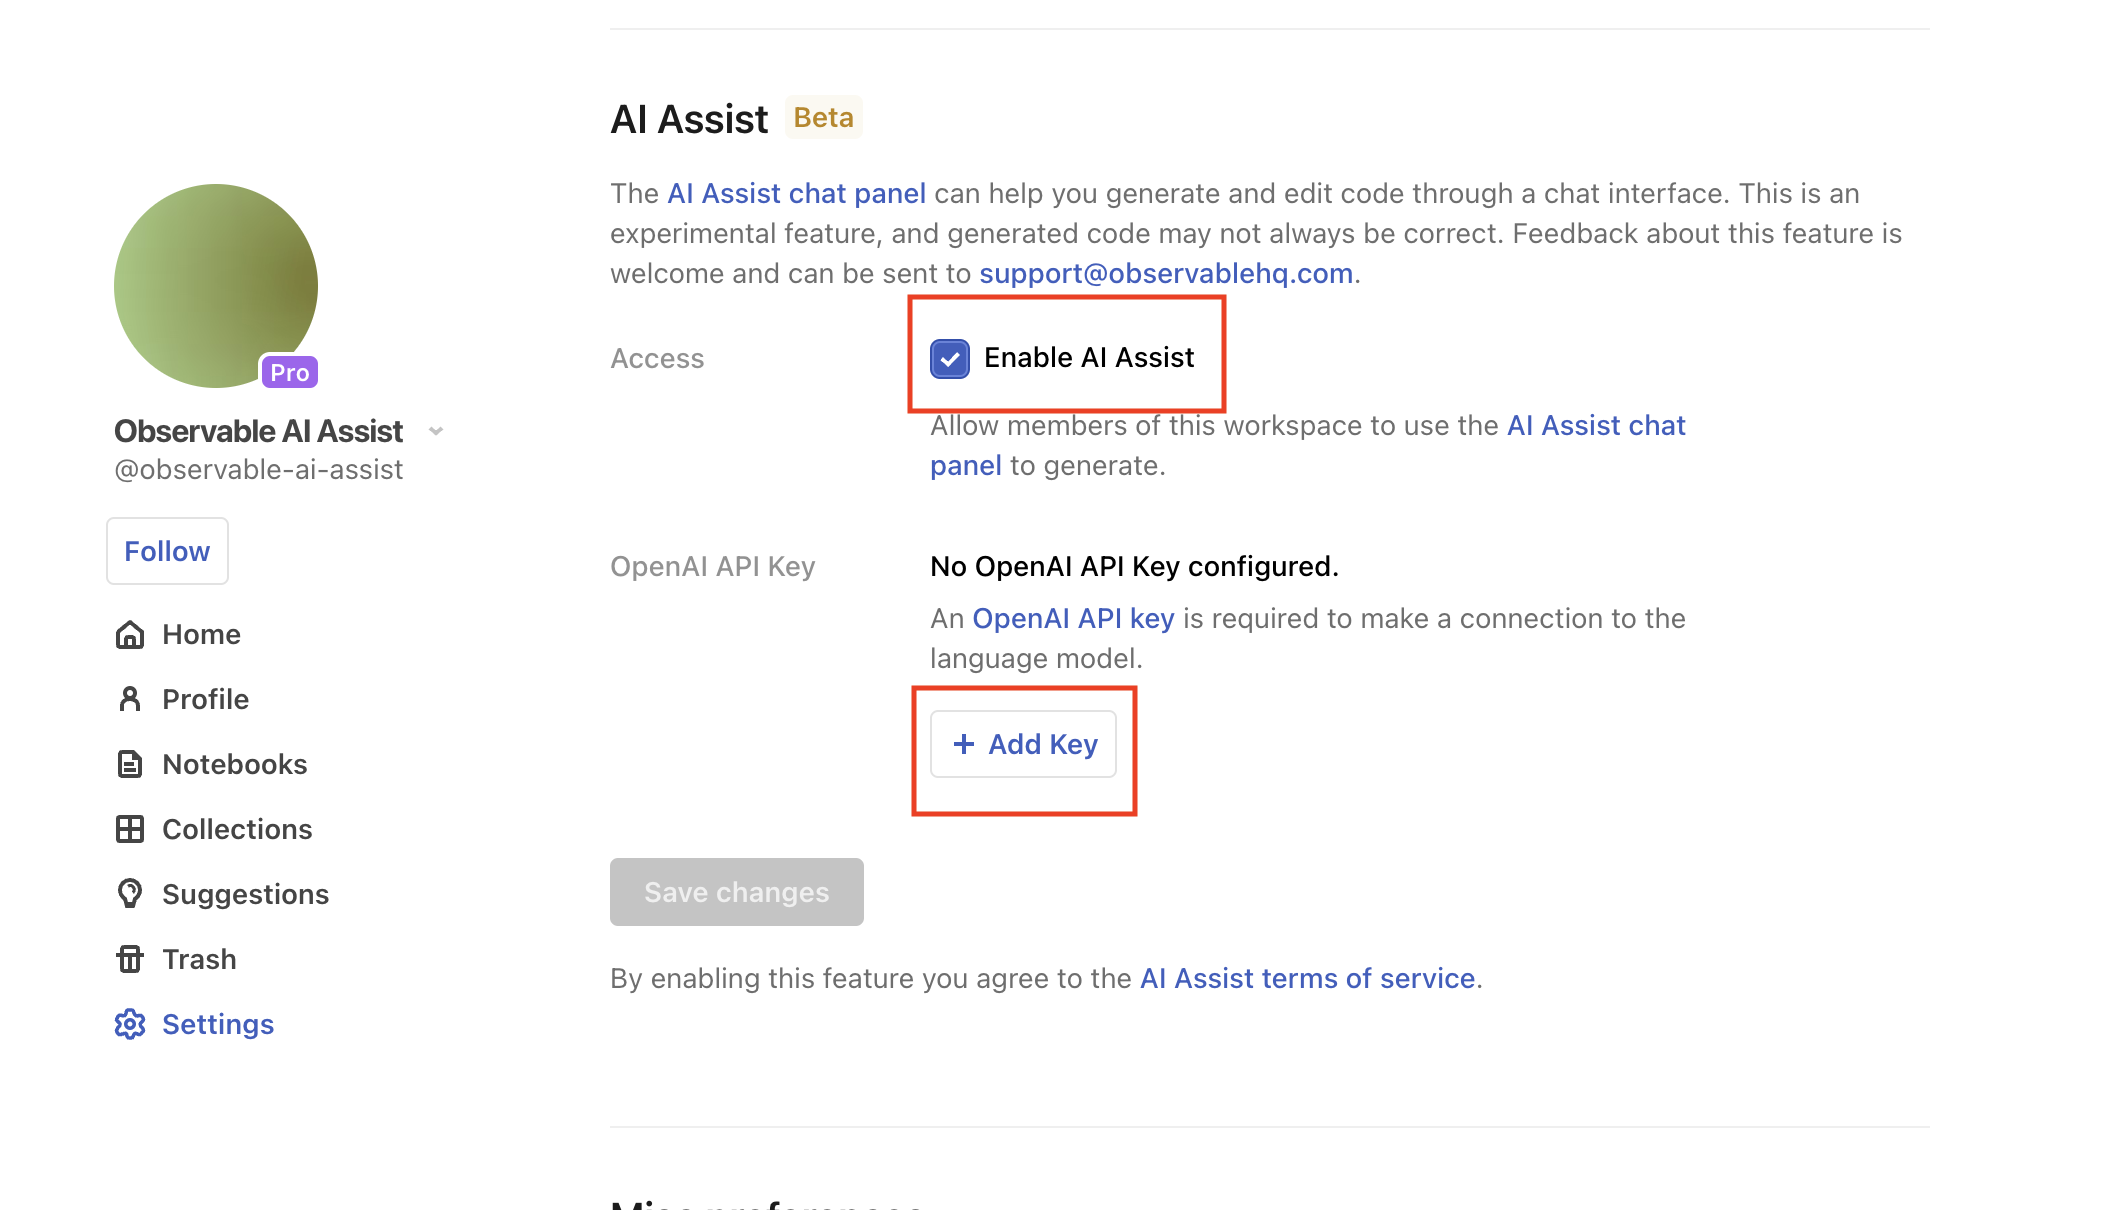 A screenshot of the Settings page scrolled down to the AI Assist section and showing the Enable AI Assist option selected and highlighted with a red rectangle outline overlay around it and the option to add an API key which is also highlighted with a red rectangle overlay.